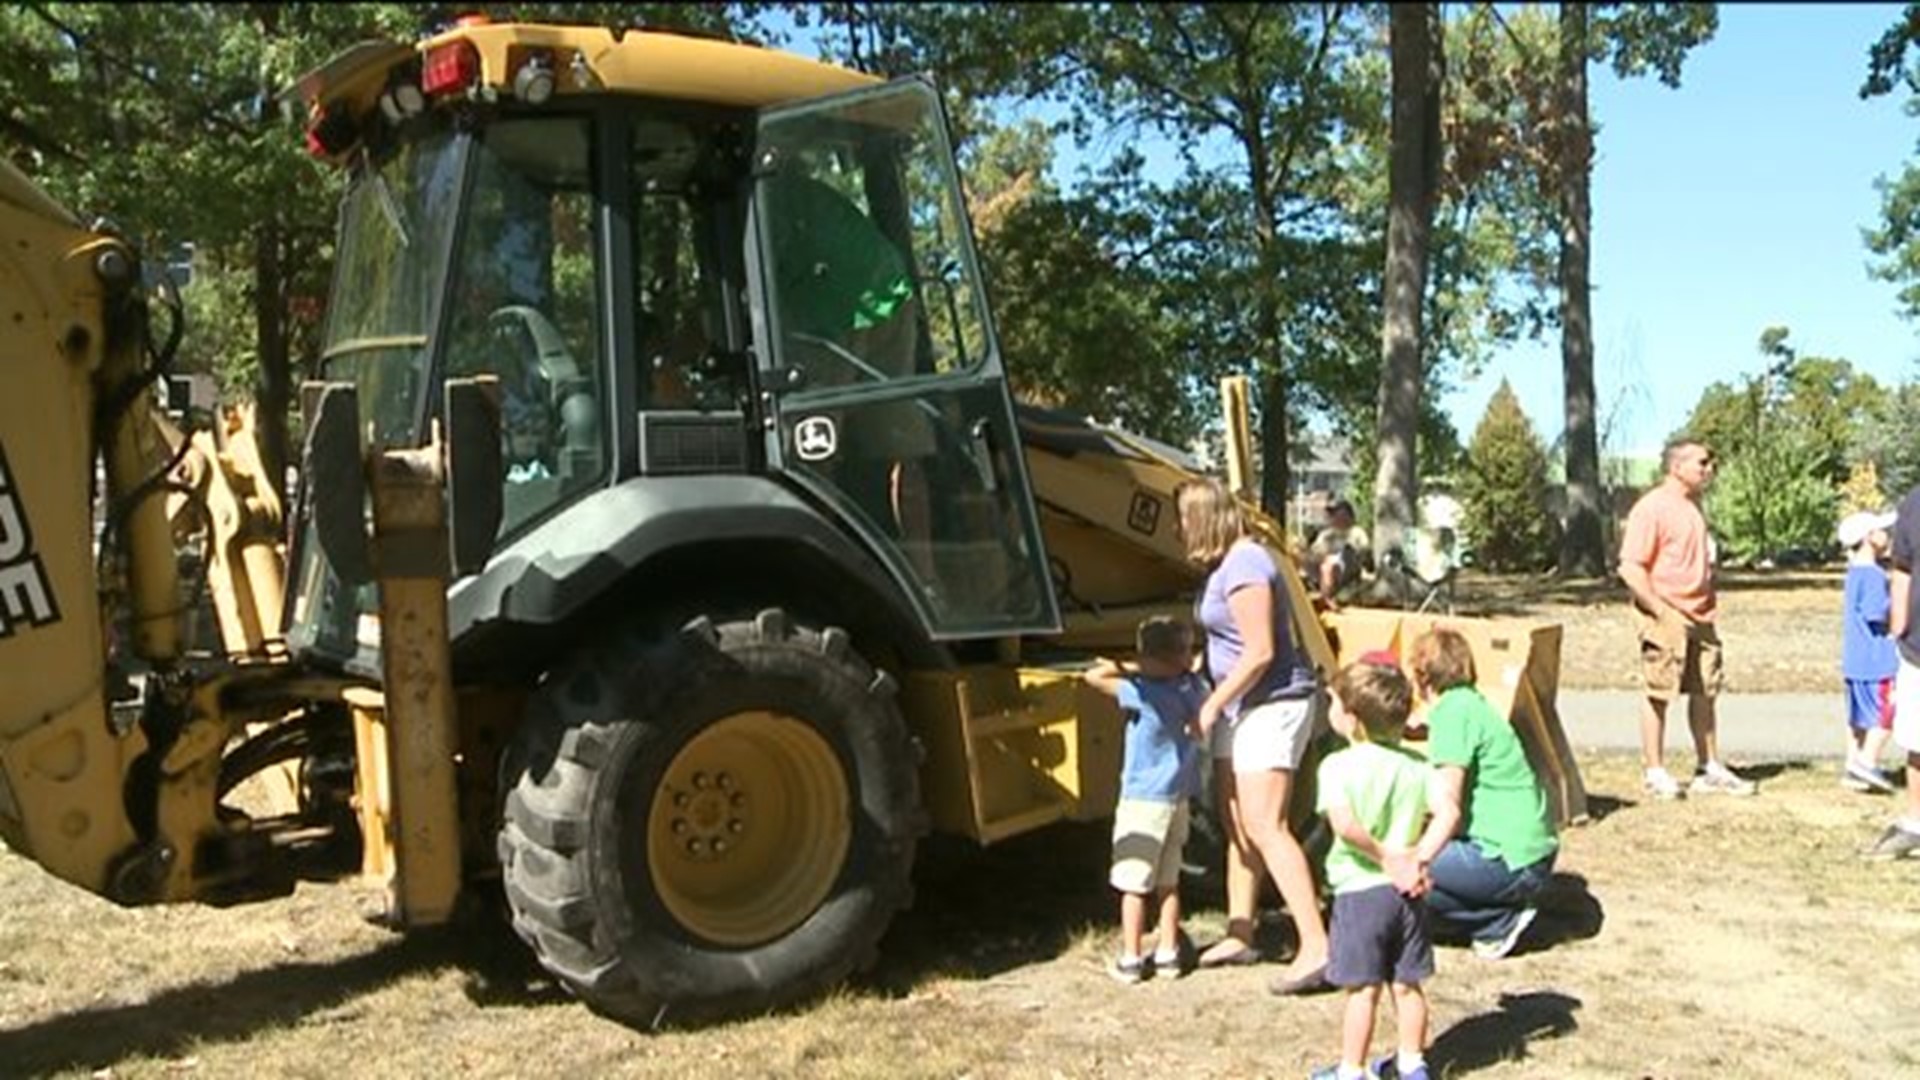 Kids Get Up Close and Personal at Touch A Truck Event